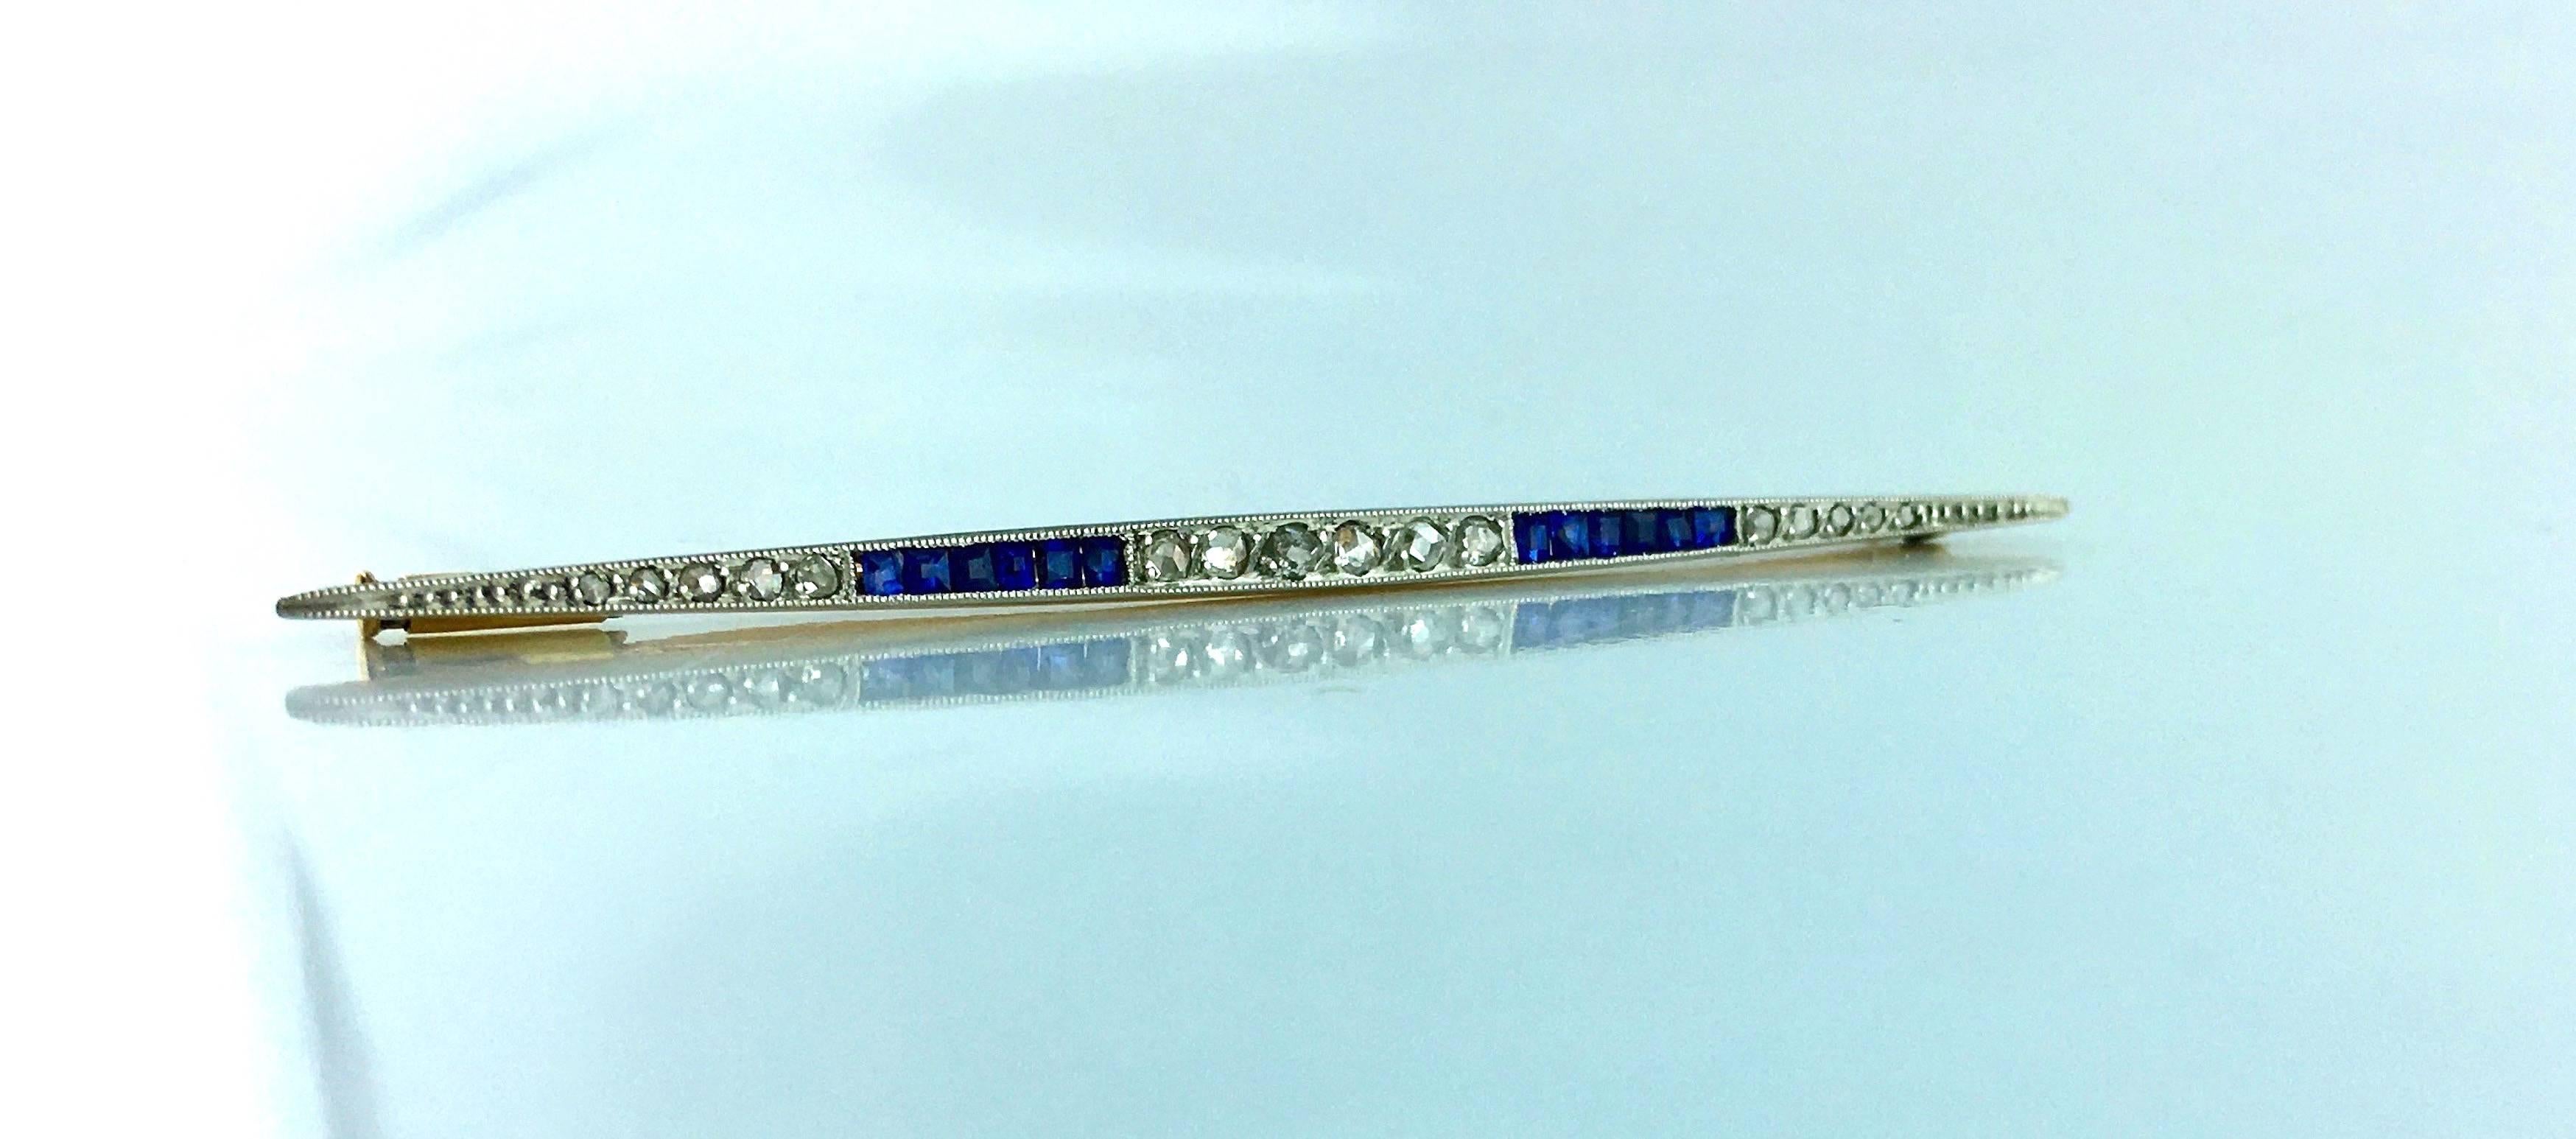 Art Deco Extremely Elegant barrette brooch set by Rose-cut diamond and calibrated sapphire mounted on platinum top and gold 18k 750.
Circa 1920
French marks.

Total length: 2.76 inches (7.00 centimeters)